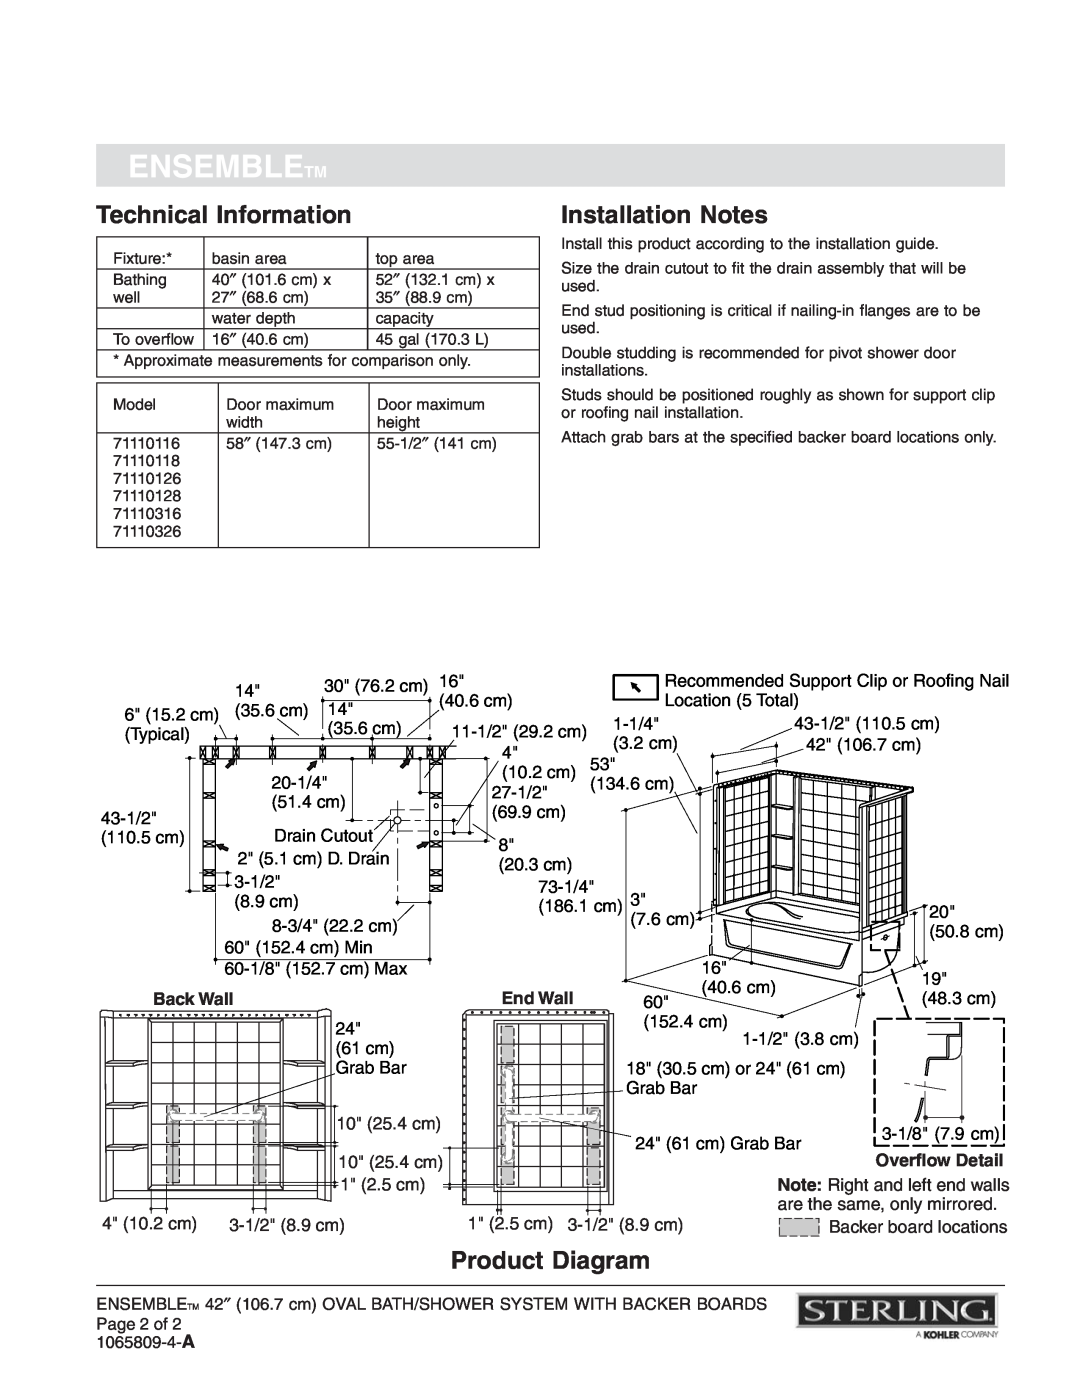 Sterling Plumbing 71110116 Technical Information, Installation Notes, Product Diagram, Ensembletm, End Wall, Back Wall 